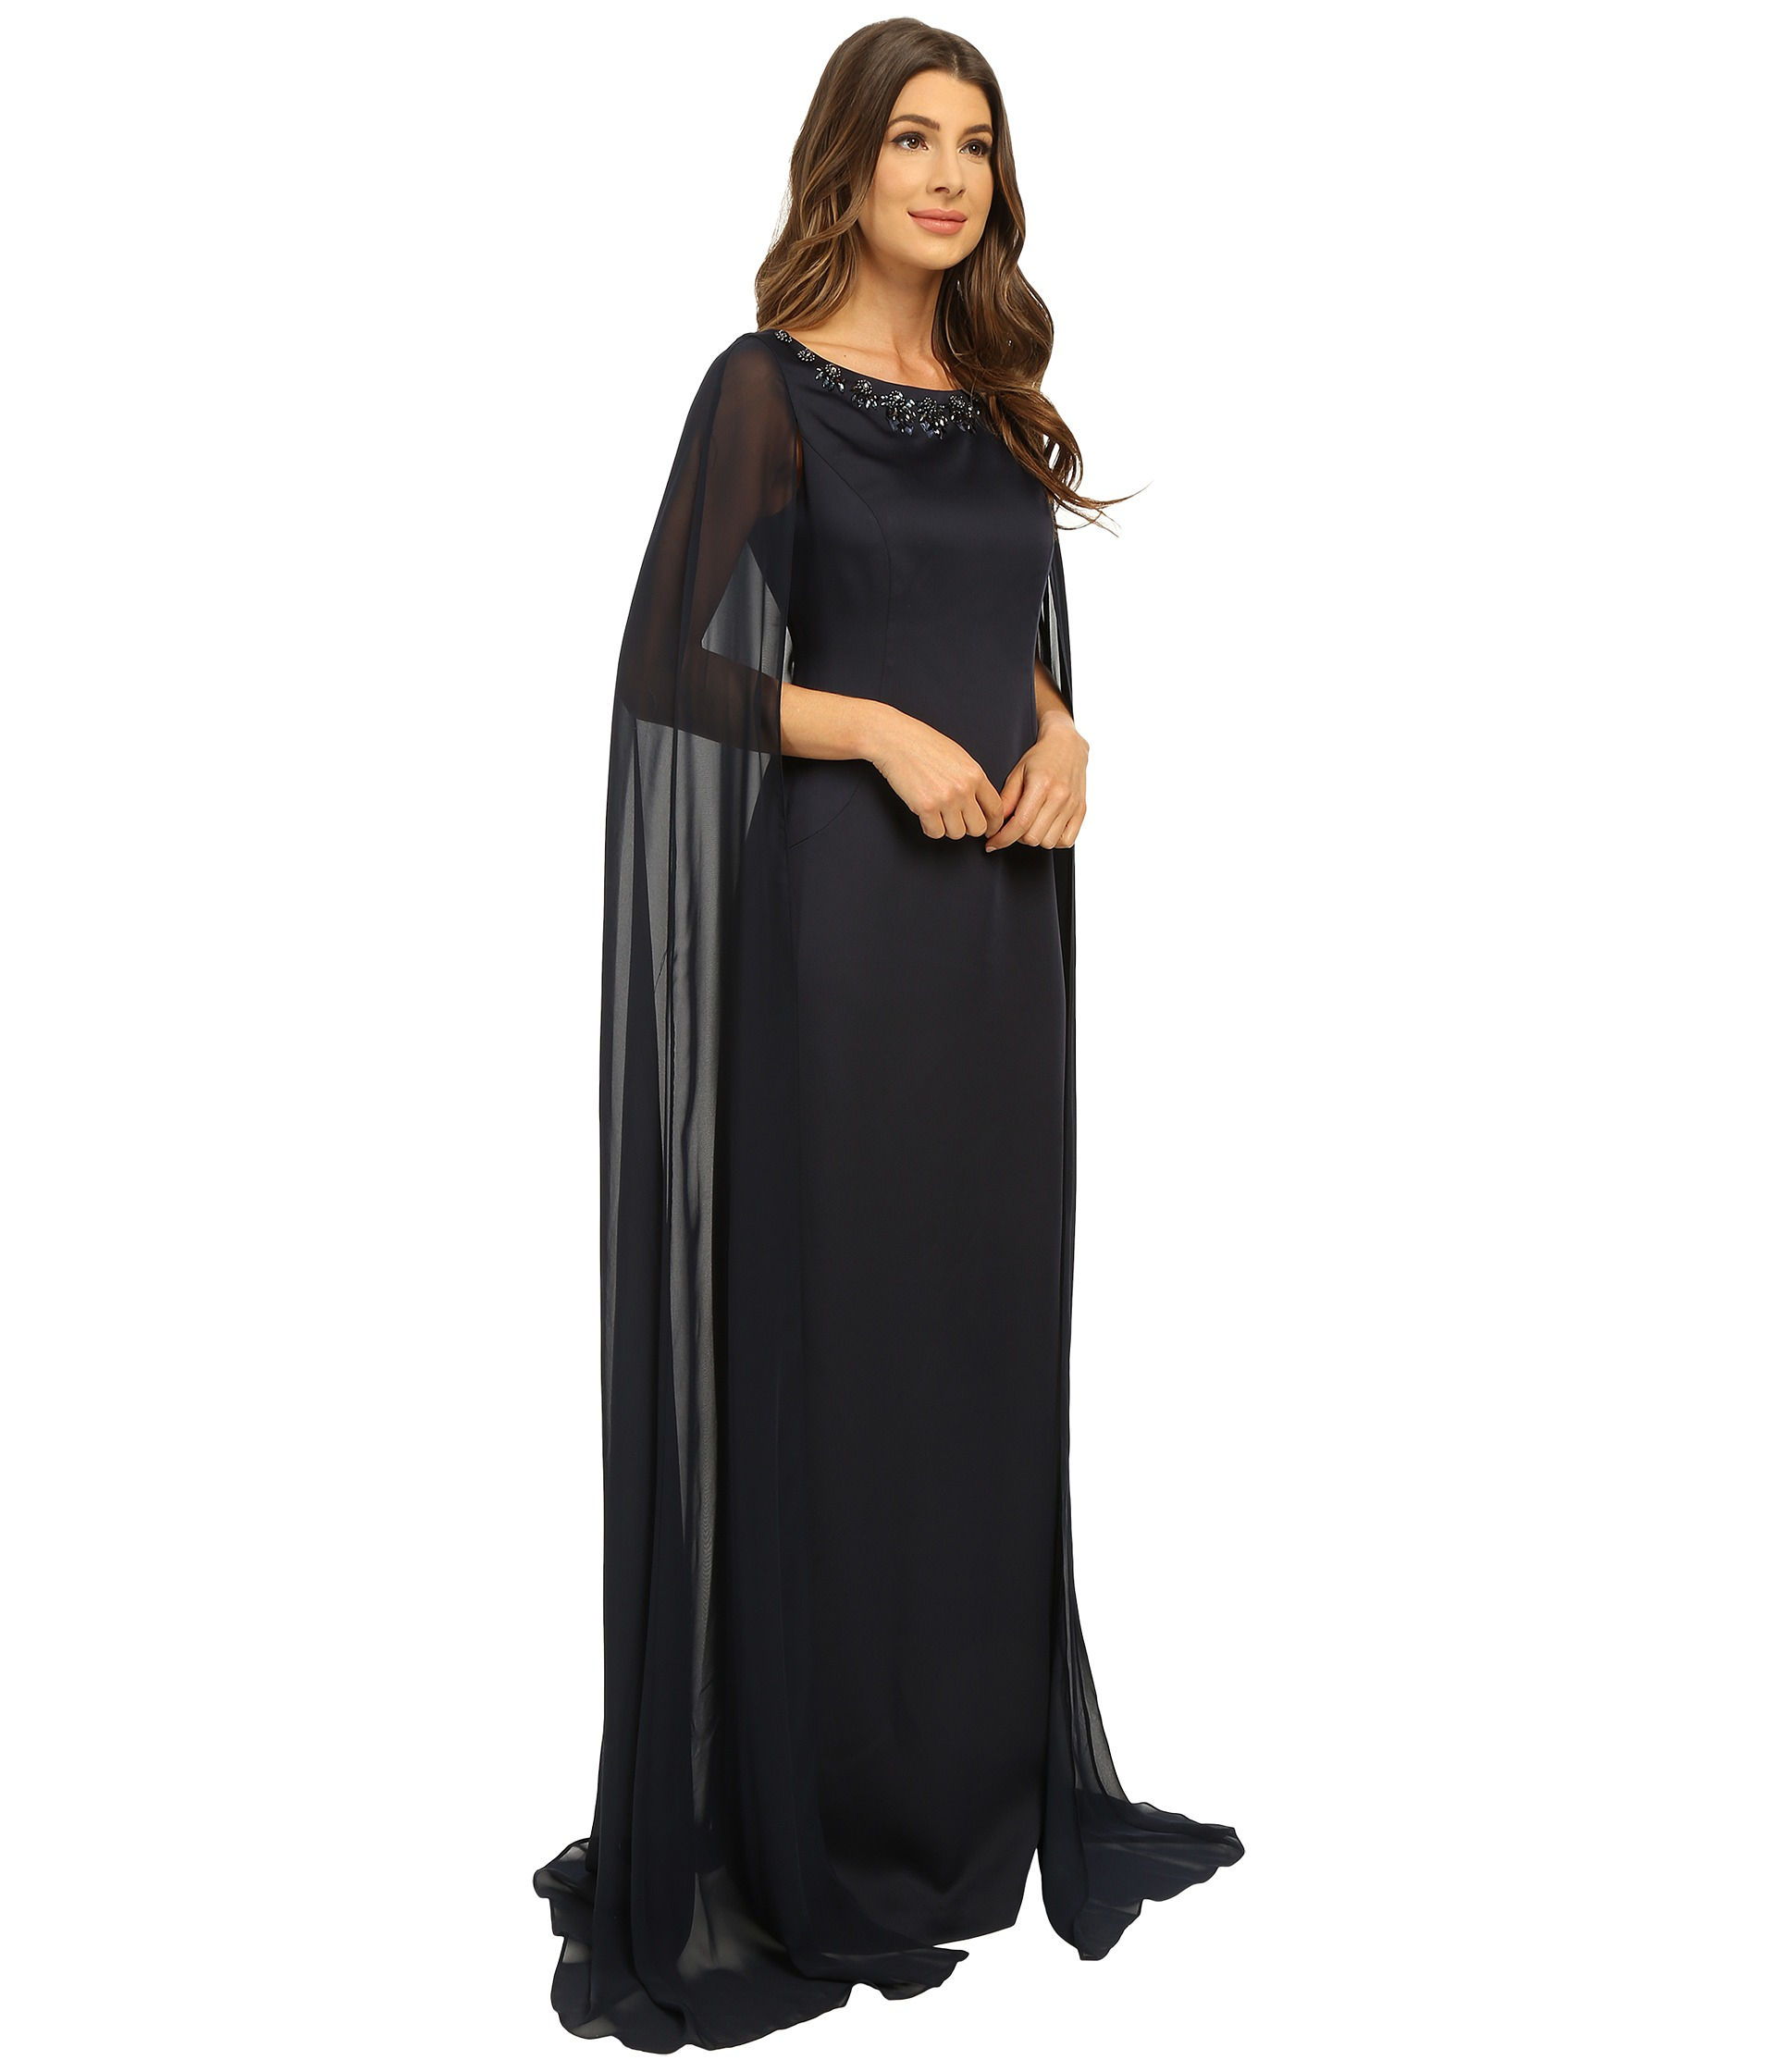 Adrianna Papell Satin Cape Dress With Neck Beading in Black - Lyst